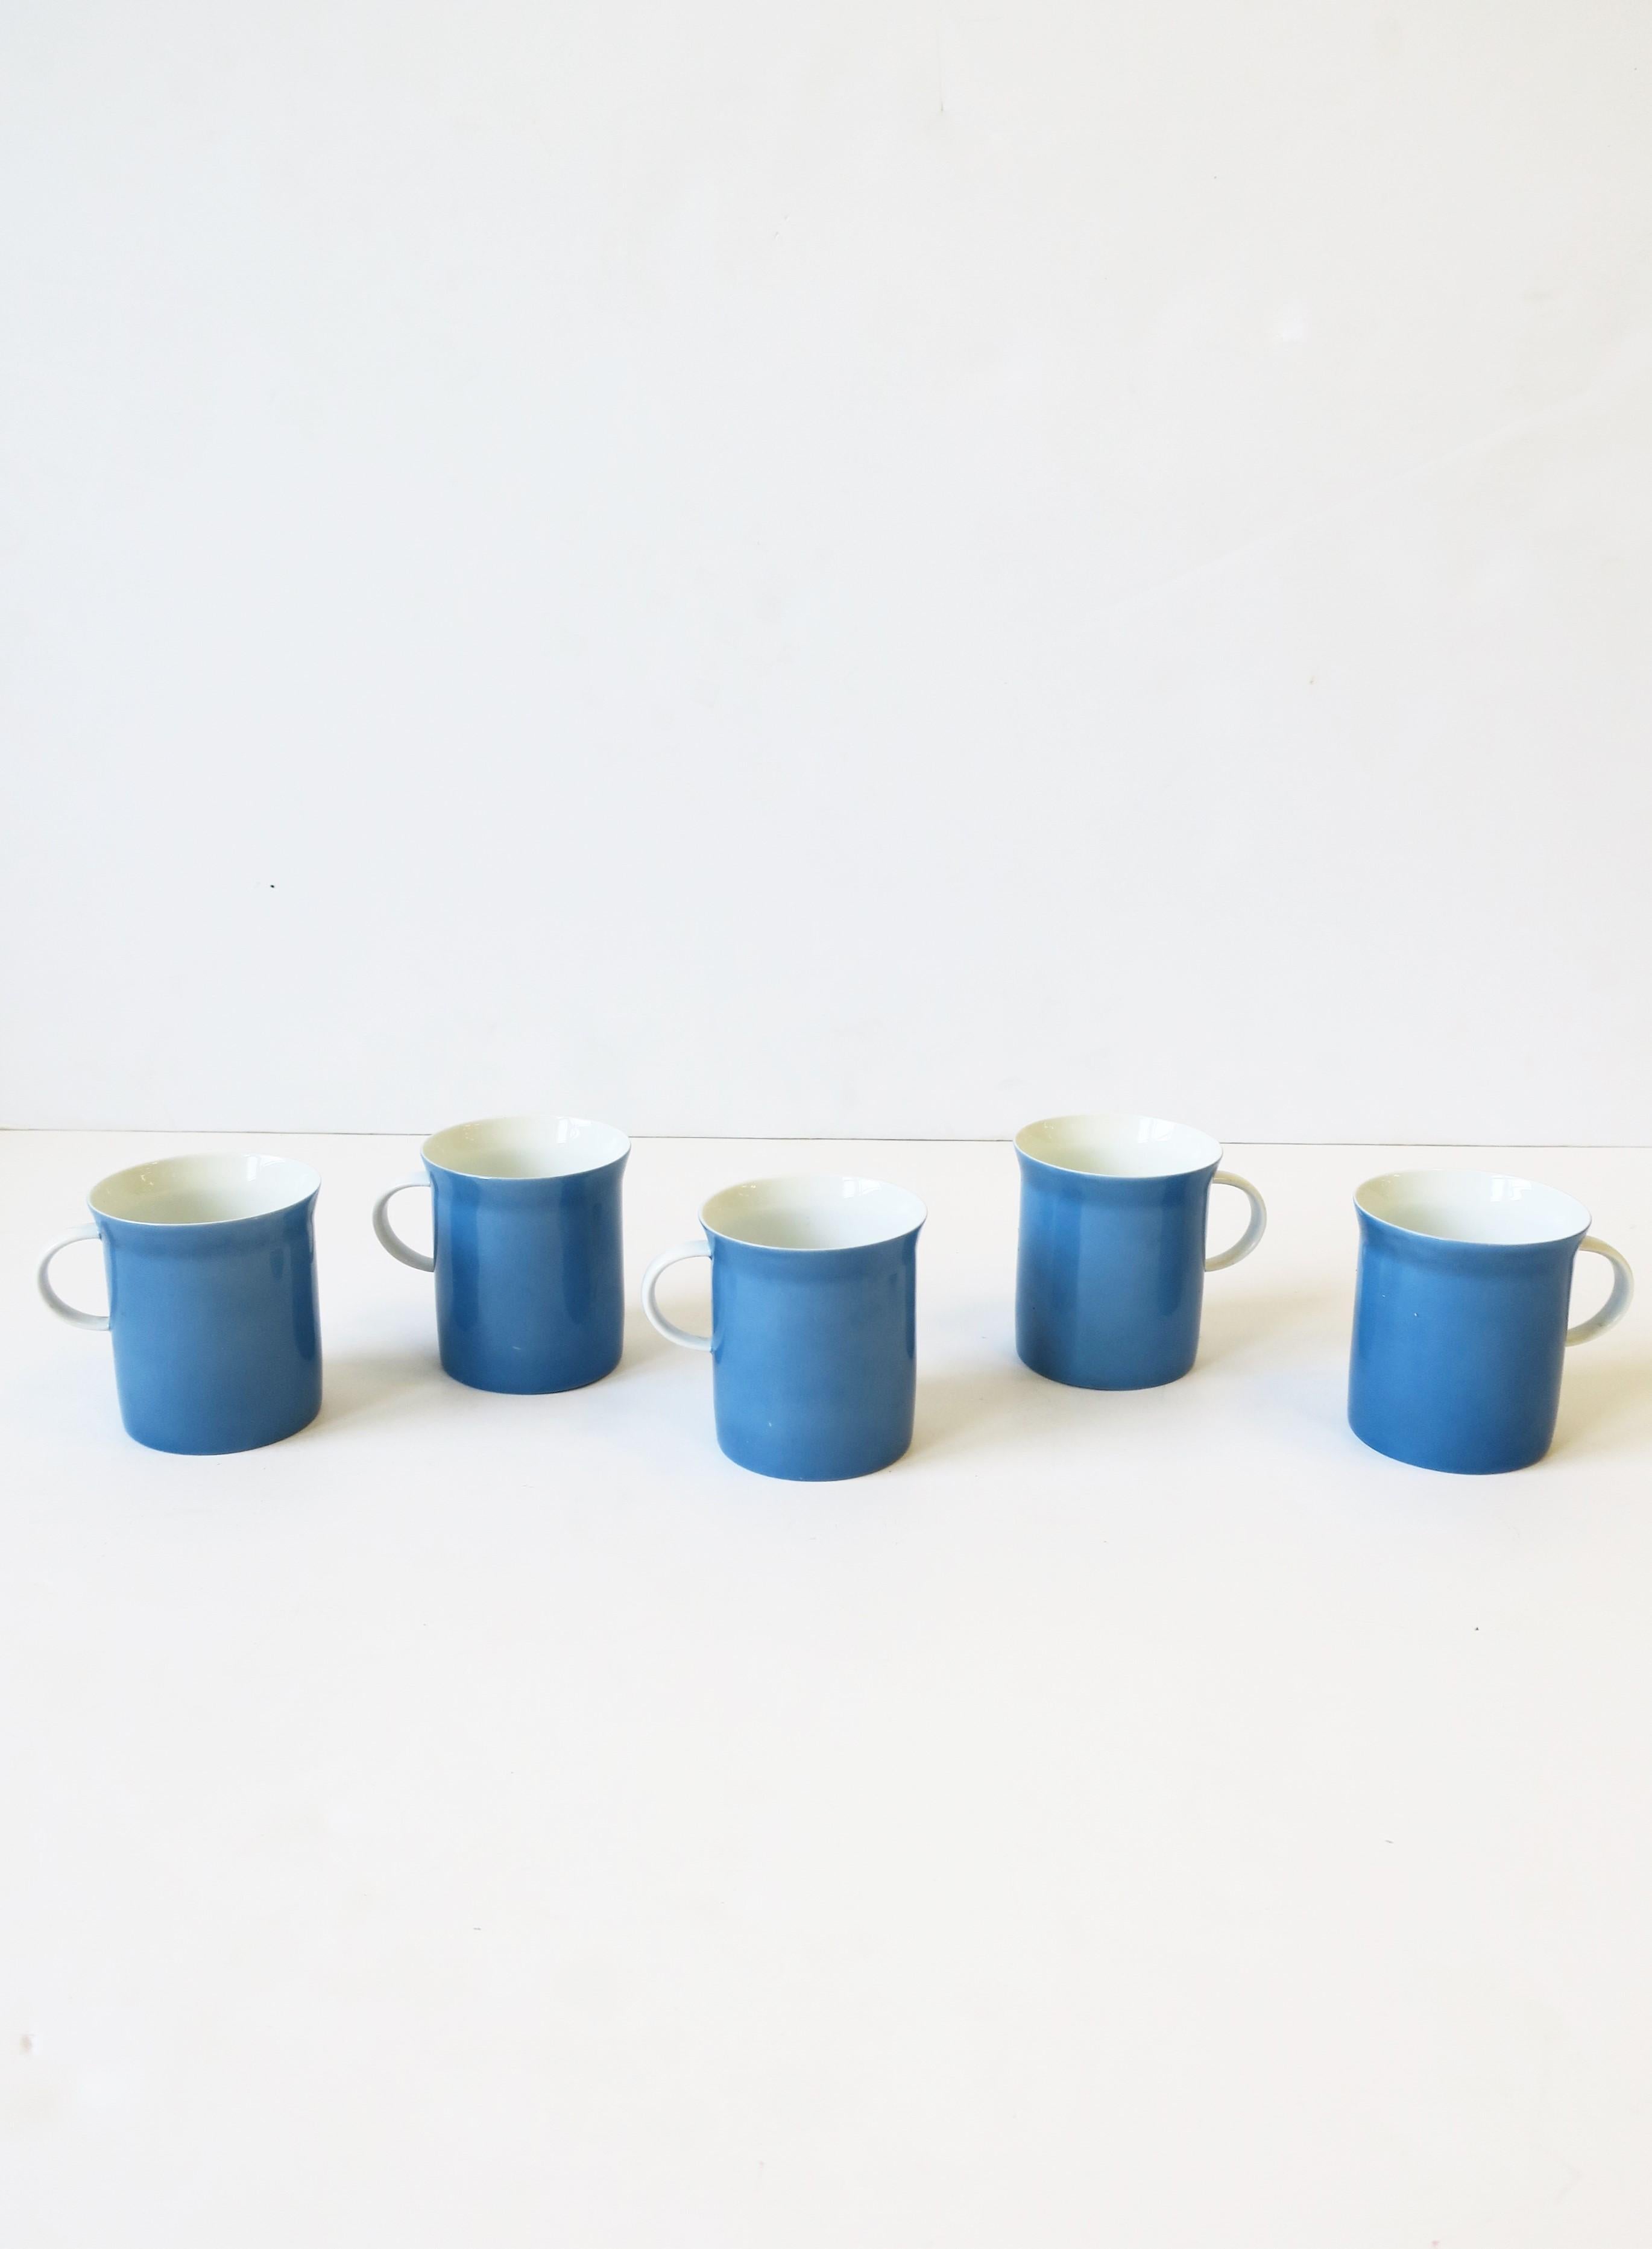 Glazed Modern Blue and White Porcelain Coffee or Tea Cups by Rosenthal 